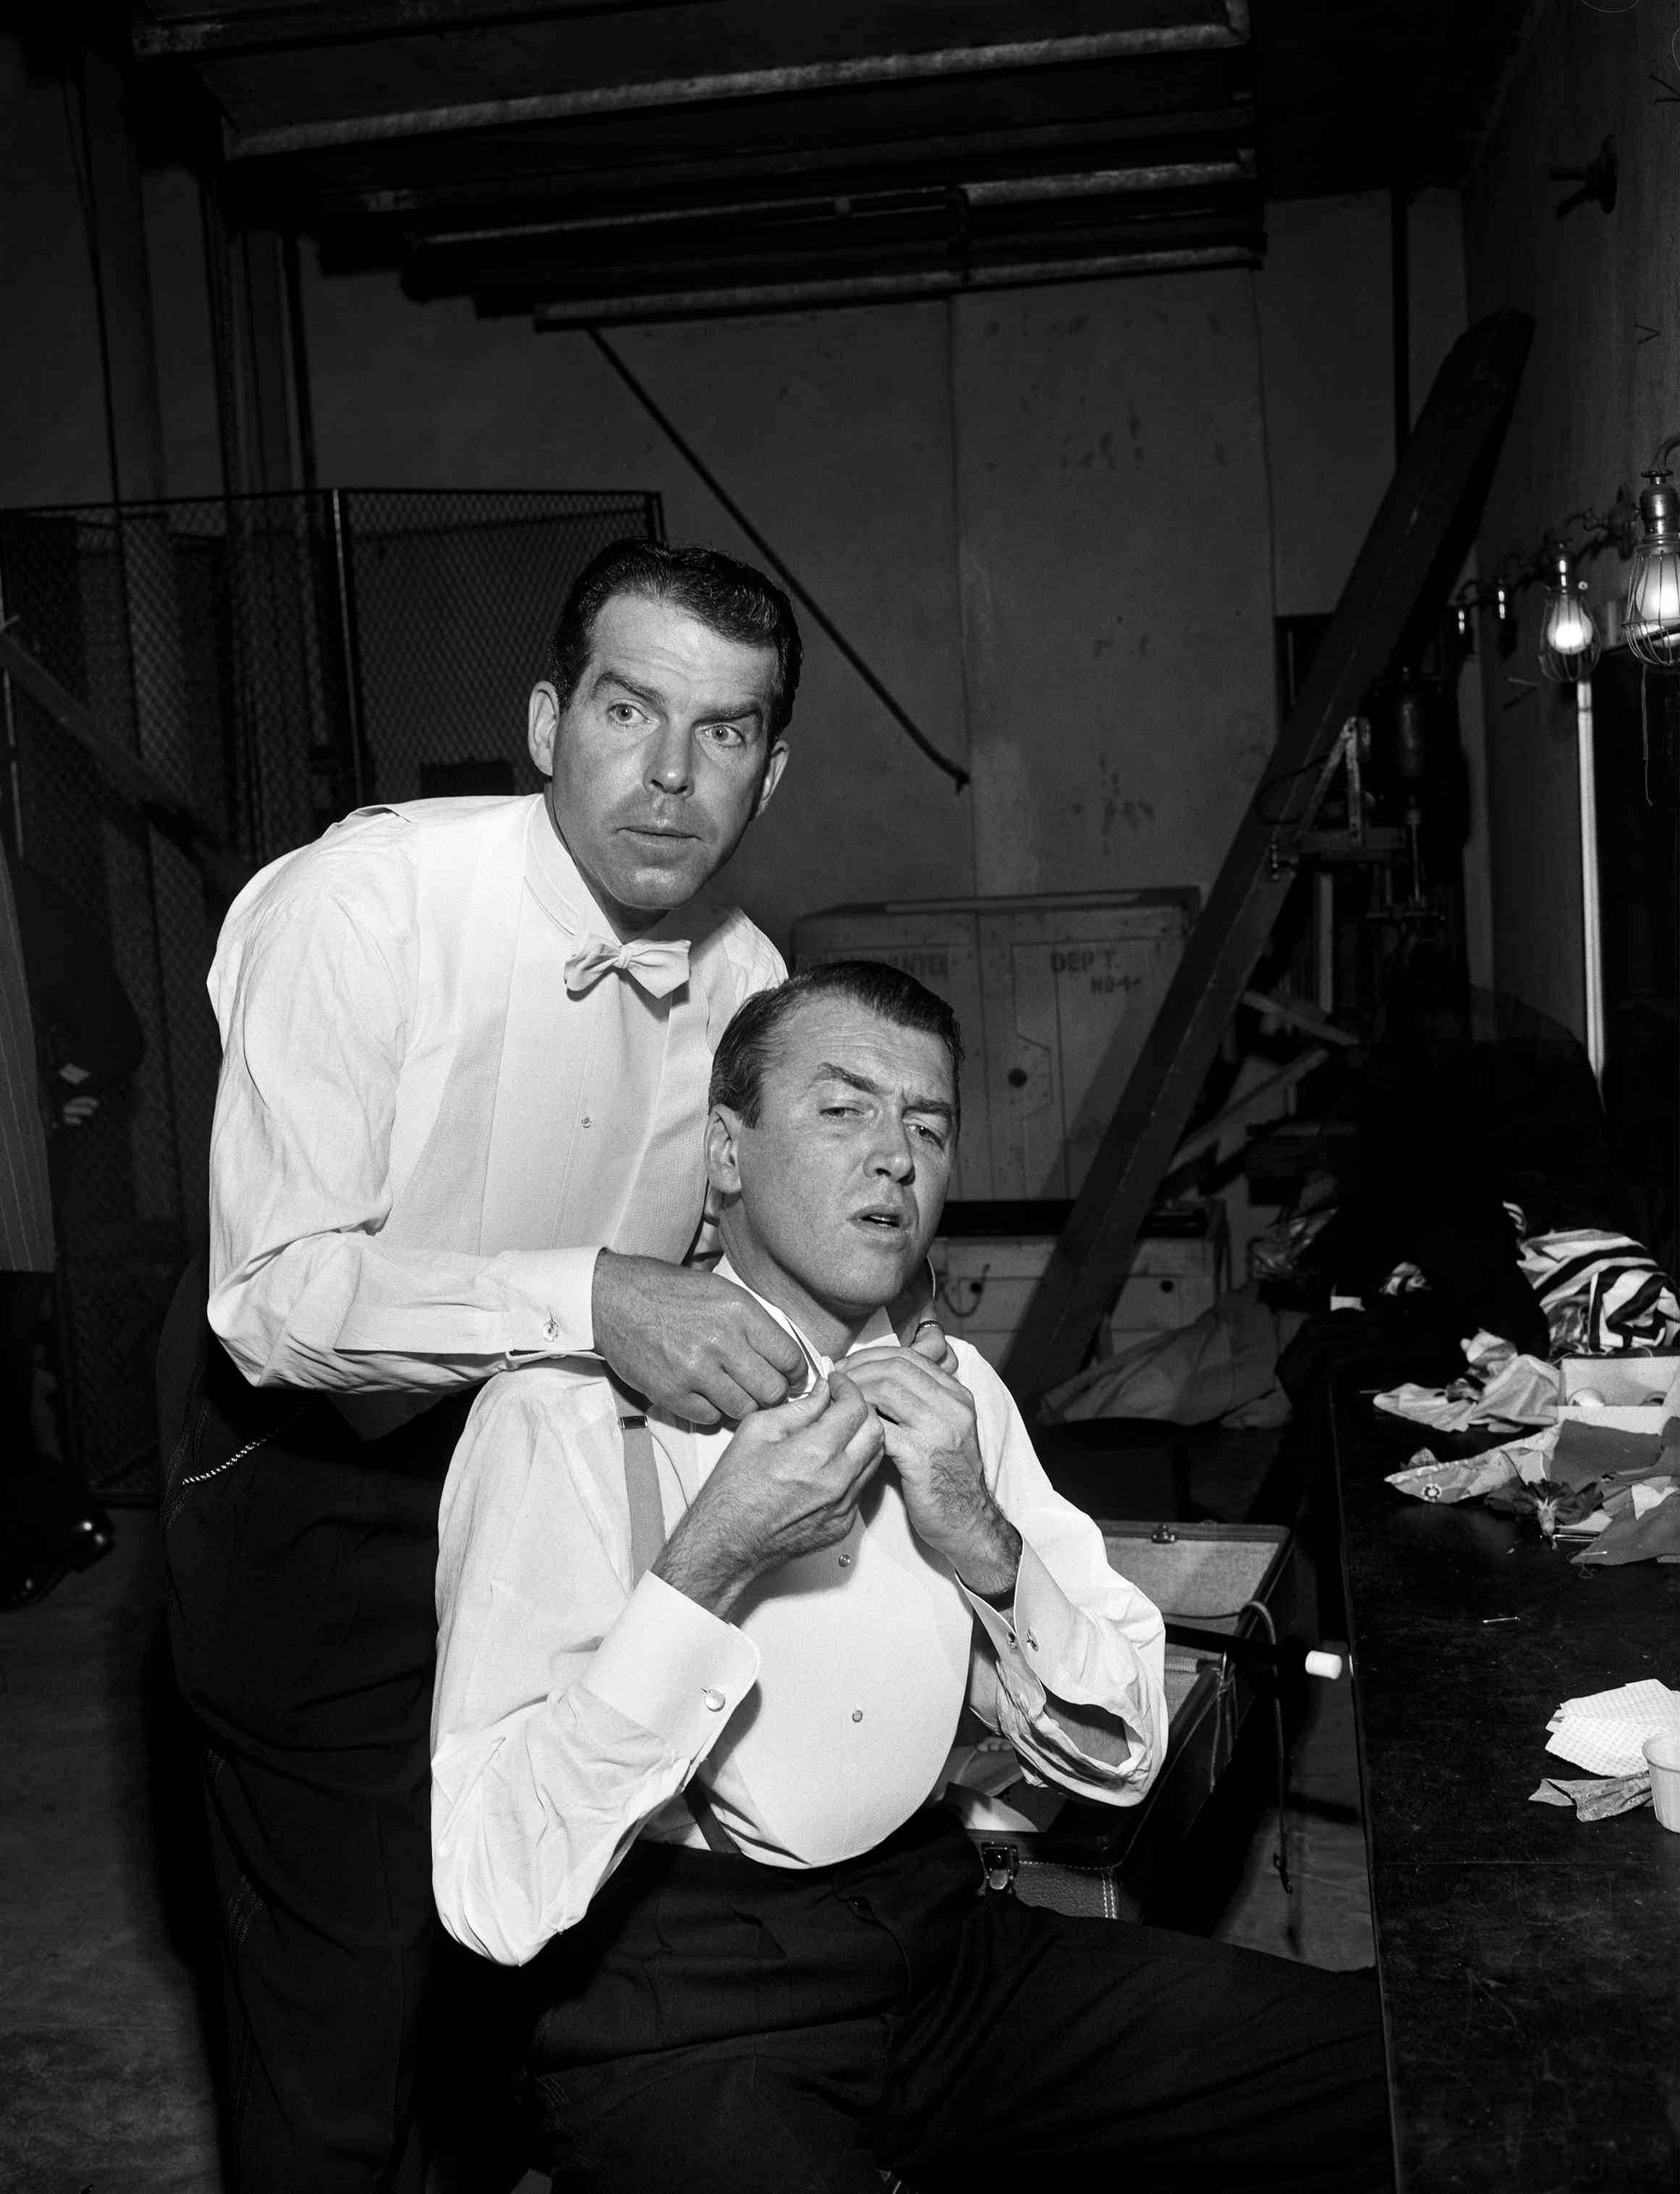 Frank Worth Portrait Photograph - Fred McMurray and Jimmy Stewart Fine Art Print